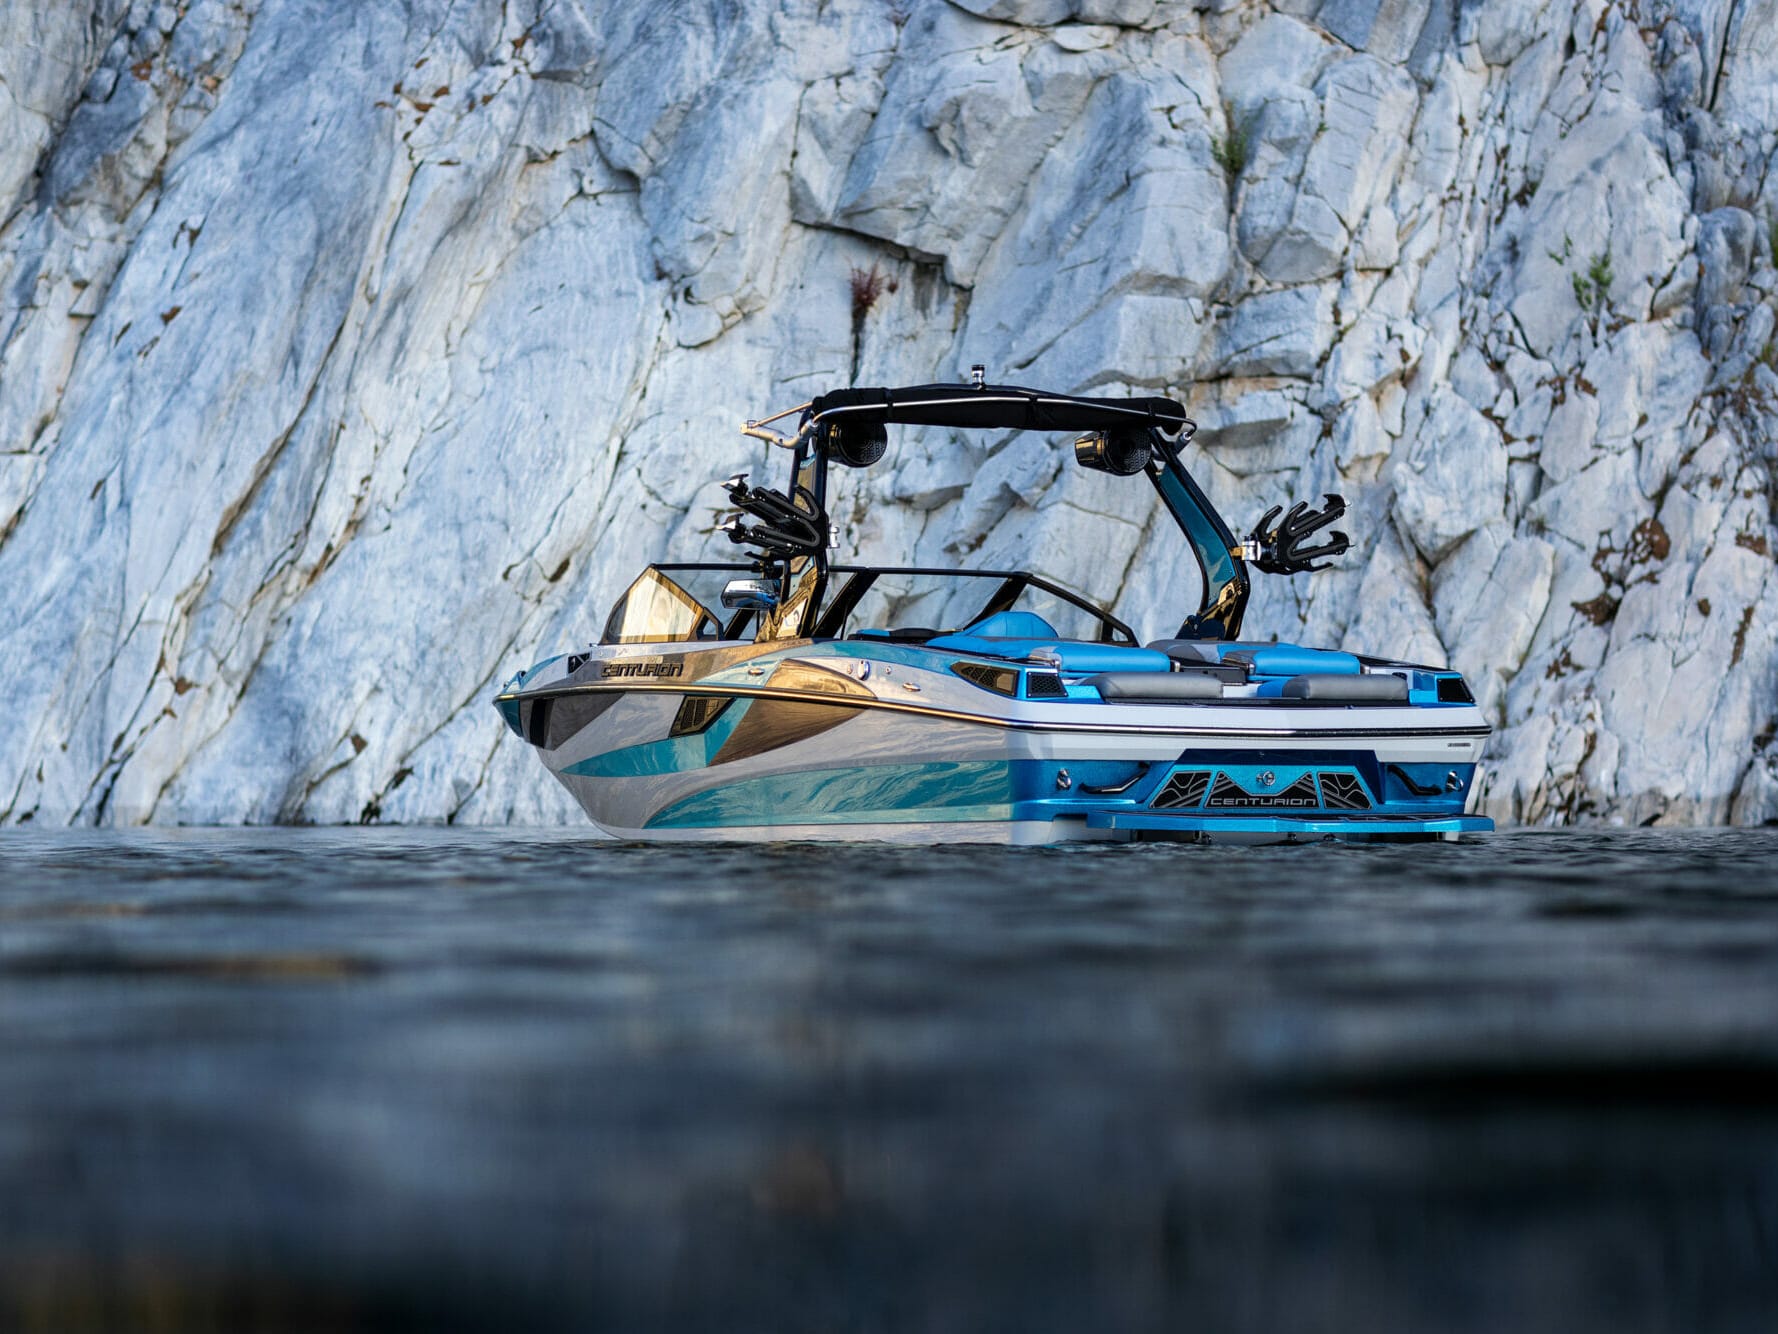 A blue and white wake boat is in the water near a cliff.